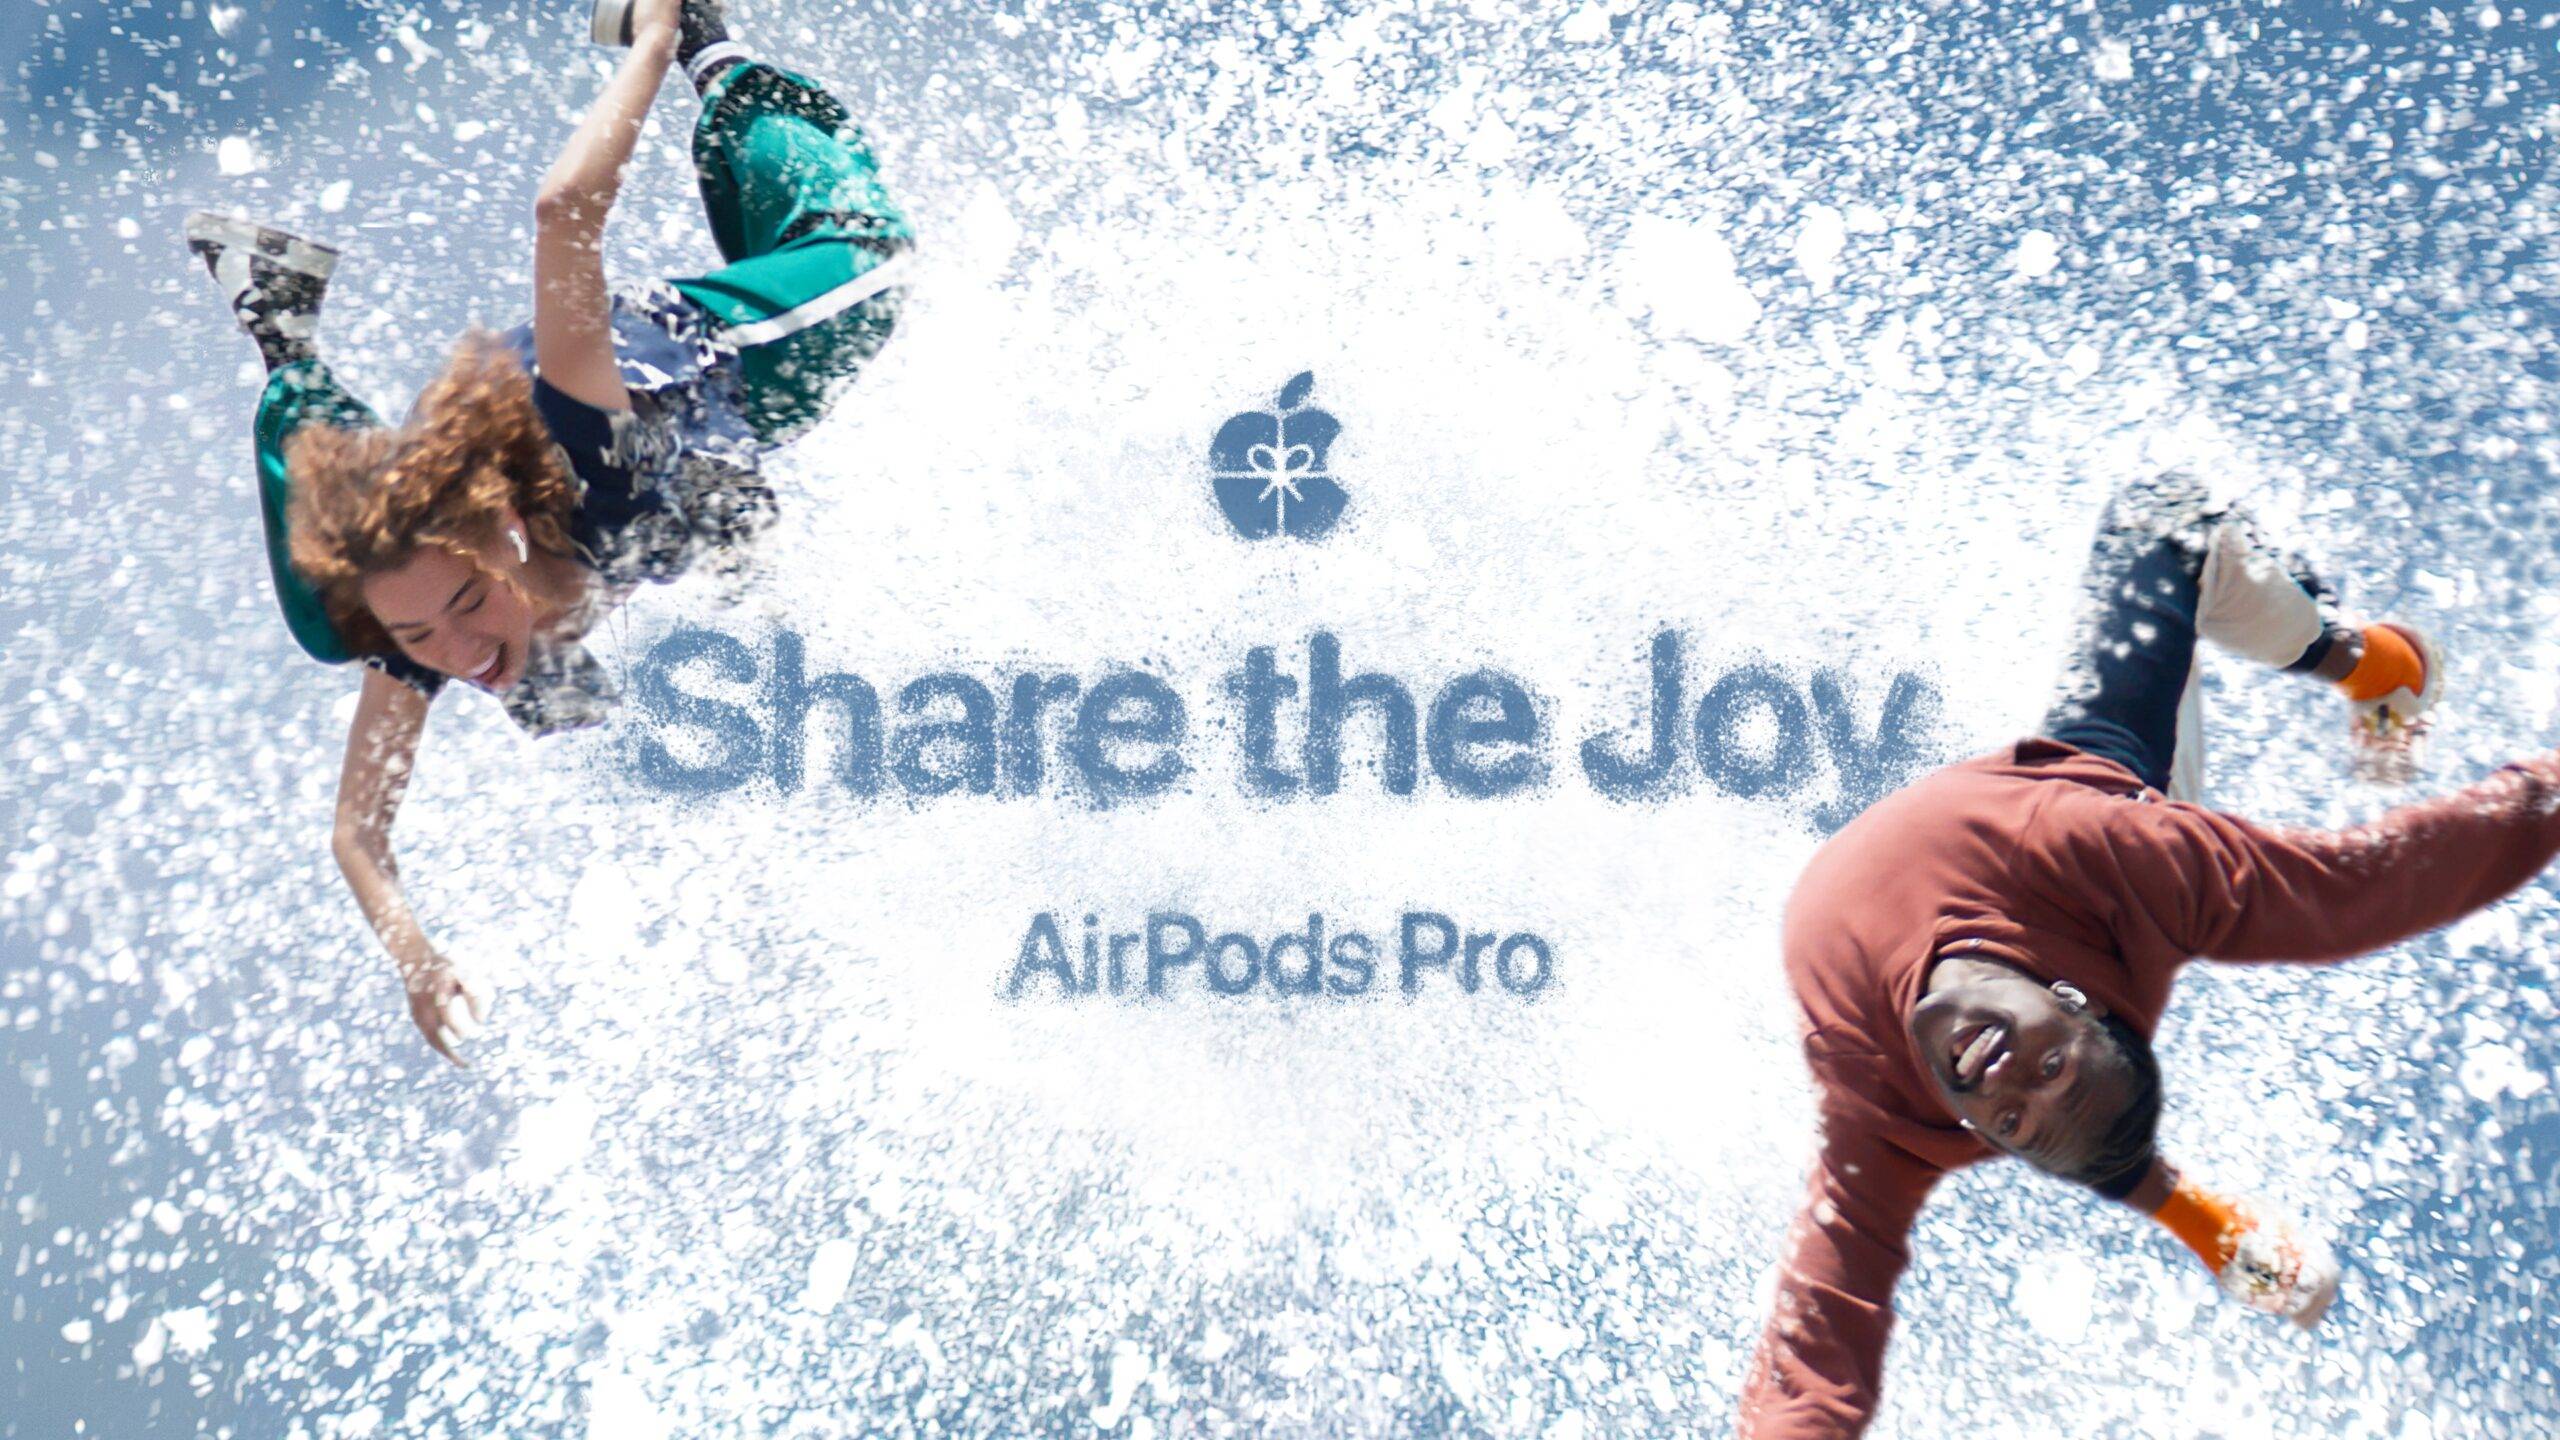 Airpods Share the Joy visual asset